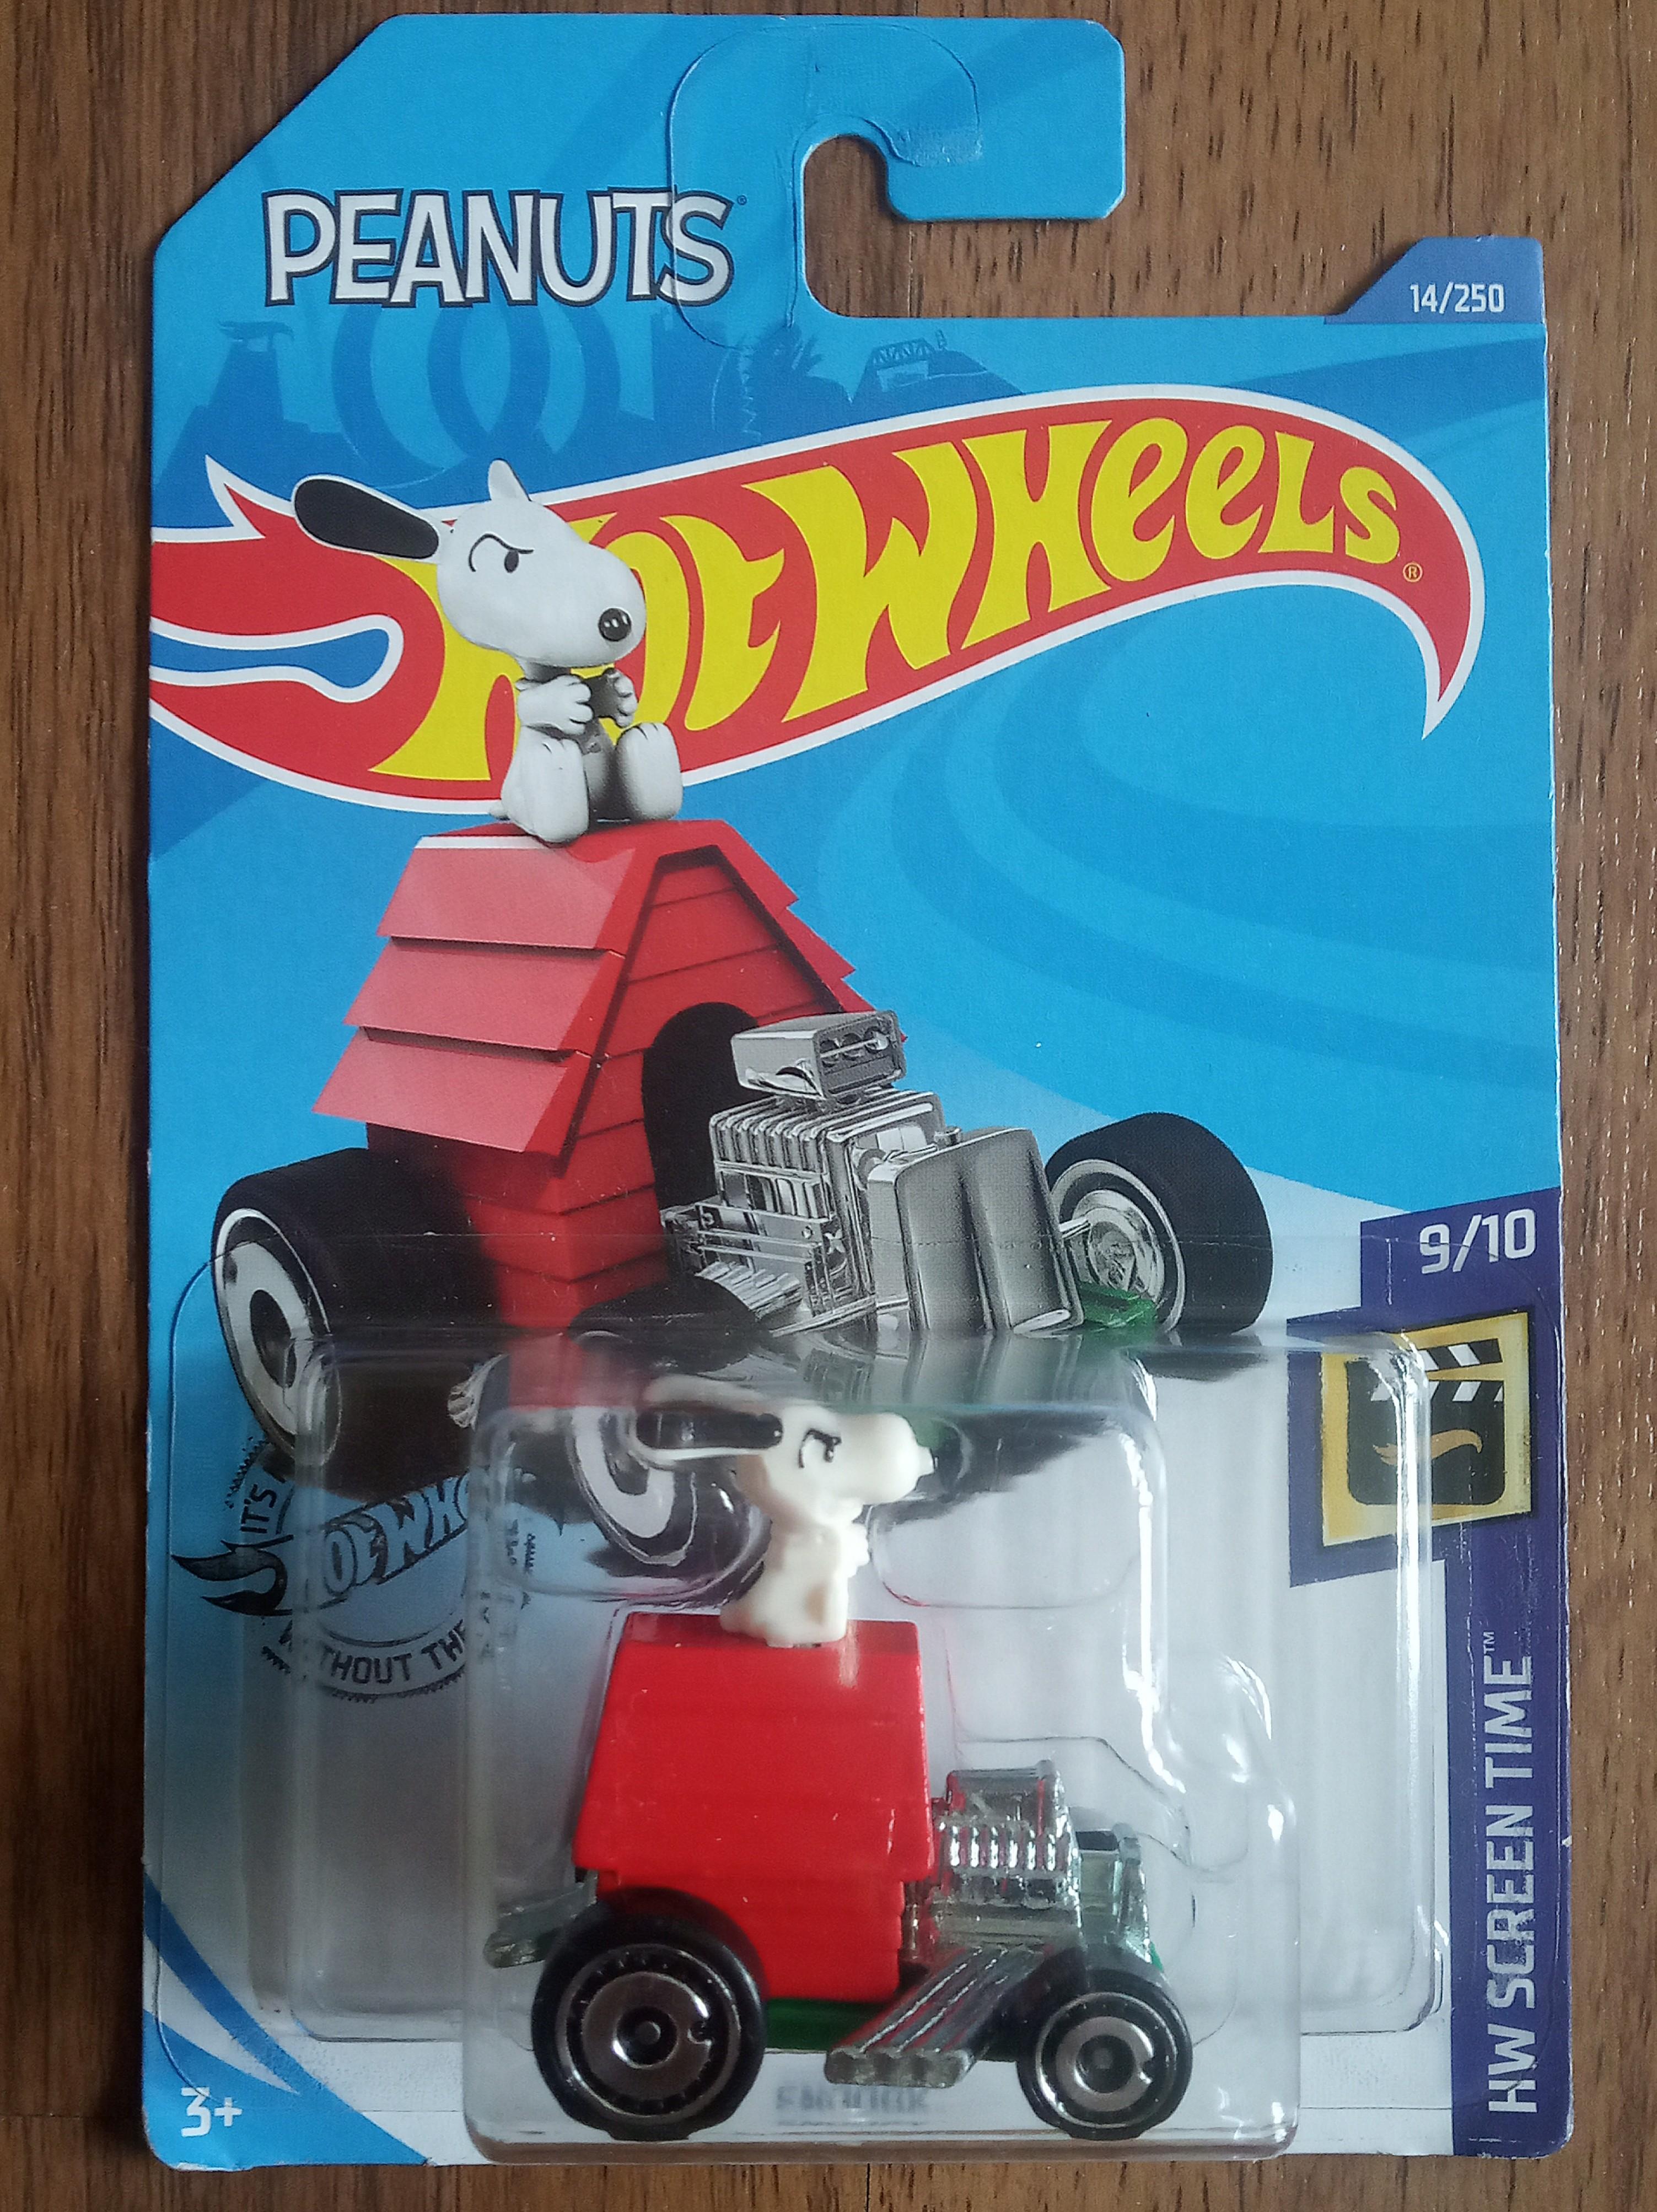 2 Hot Wheels  Snoopy Vehicle Lot Diecast 1:64